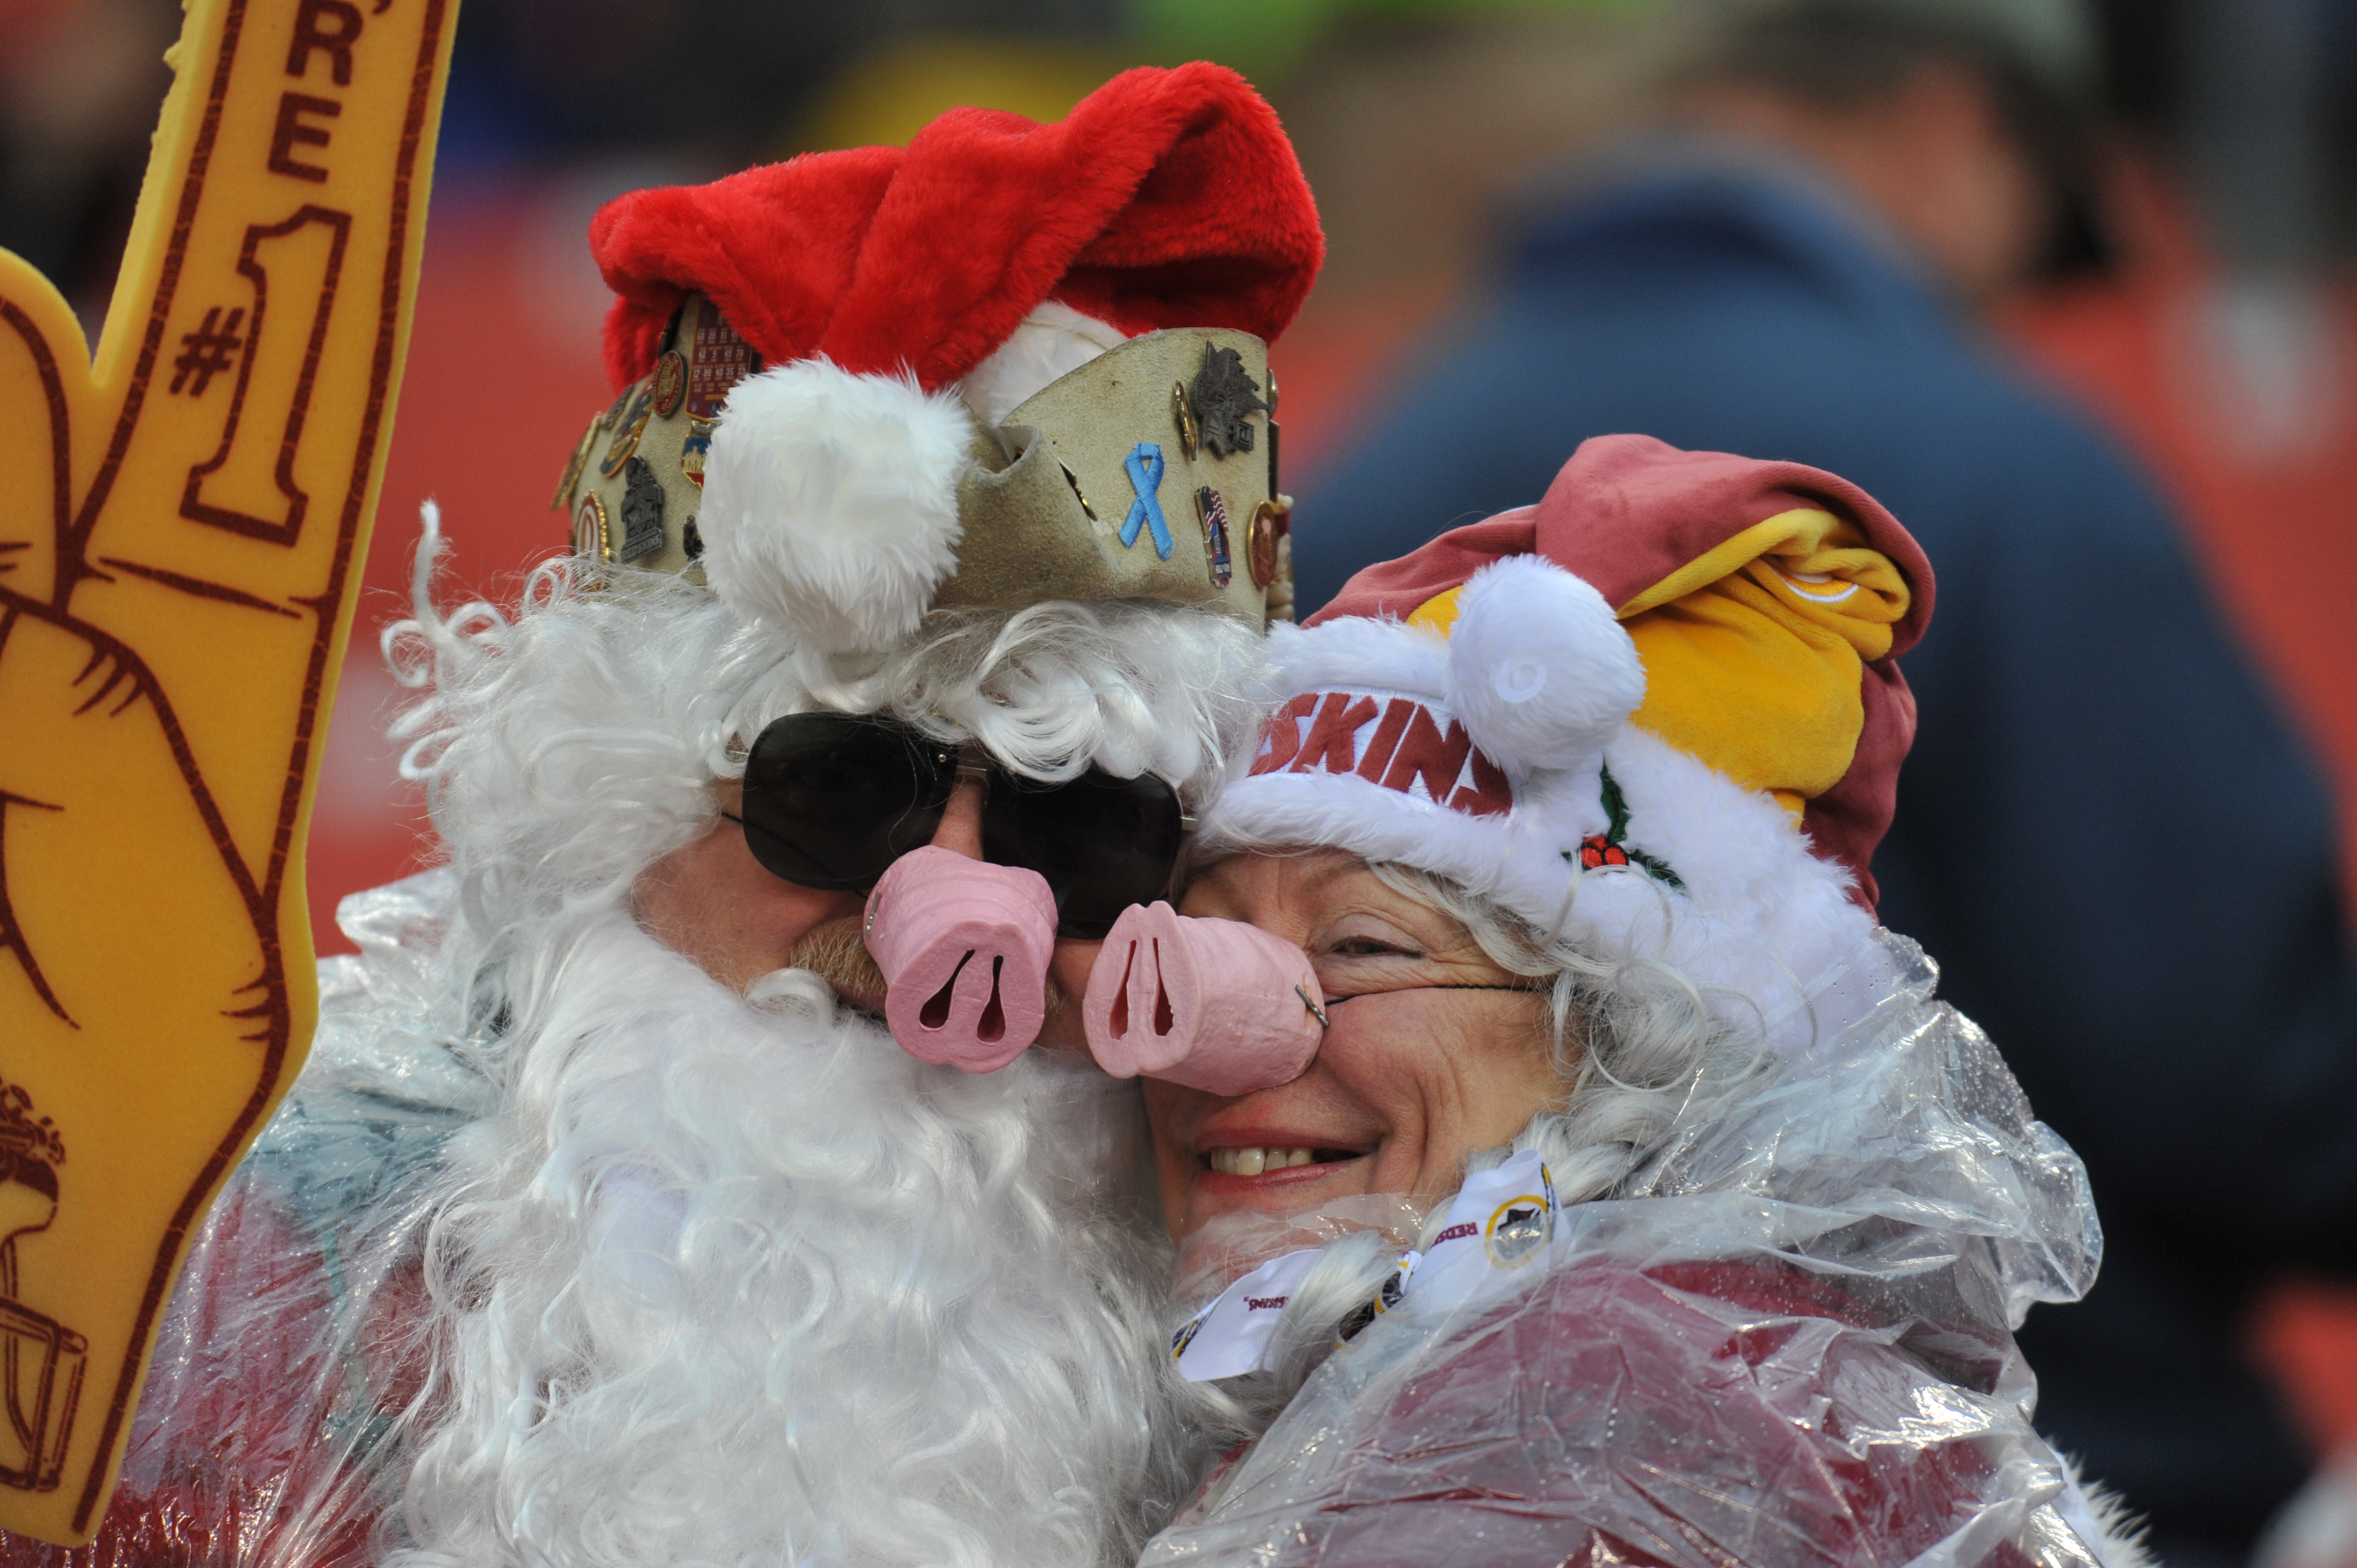 LANDOVER, MD - DECEMBER 12: Fans of the Washington Redskins watch the game against the Tampa Bay Buccaneers at FedExField on December 12, 2010 in Landover, Maryland. The Buccaneers defeated the Redskins 17-16. (Photo by Larry French/Getty Images)